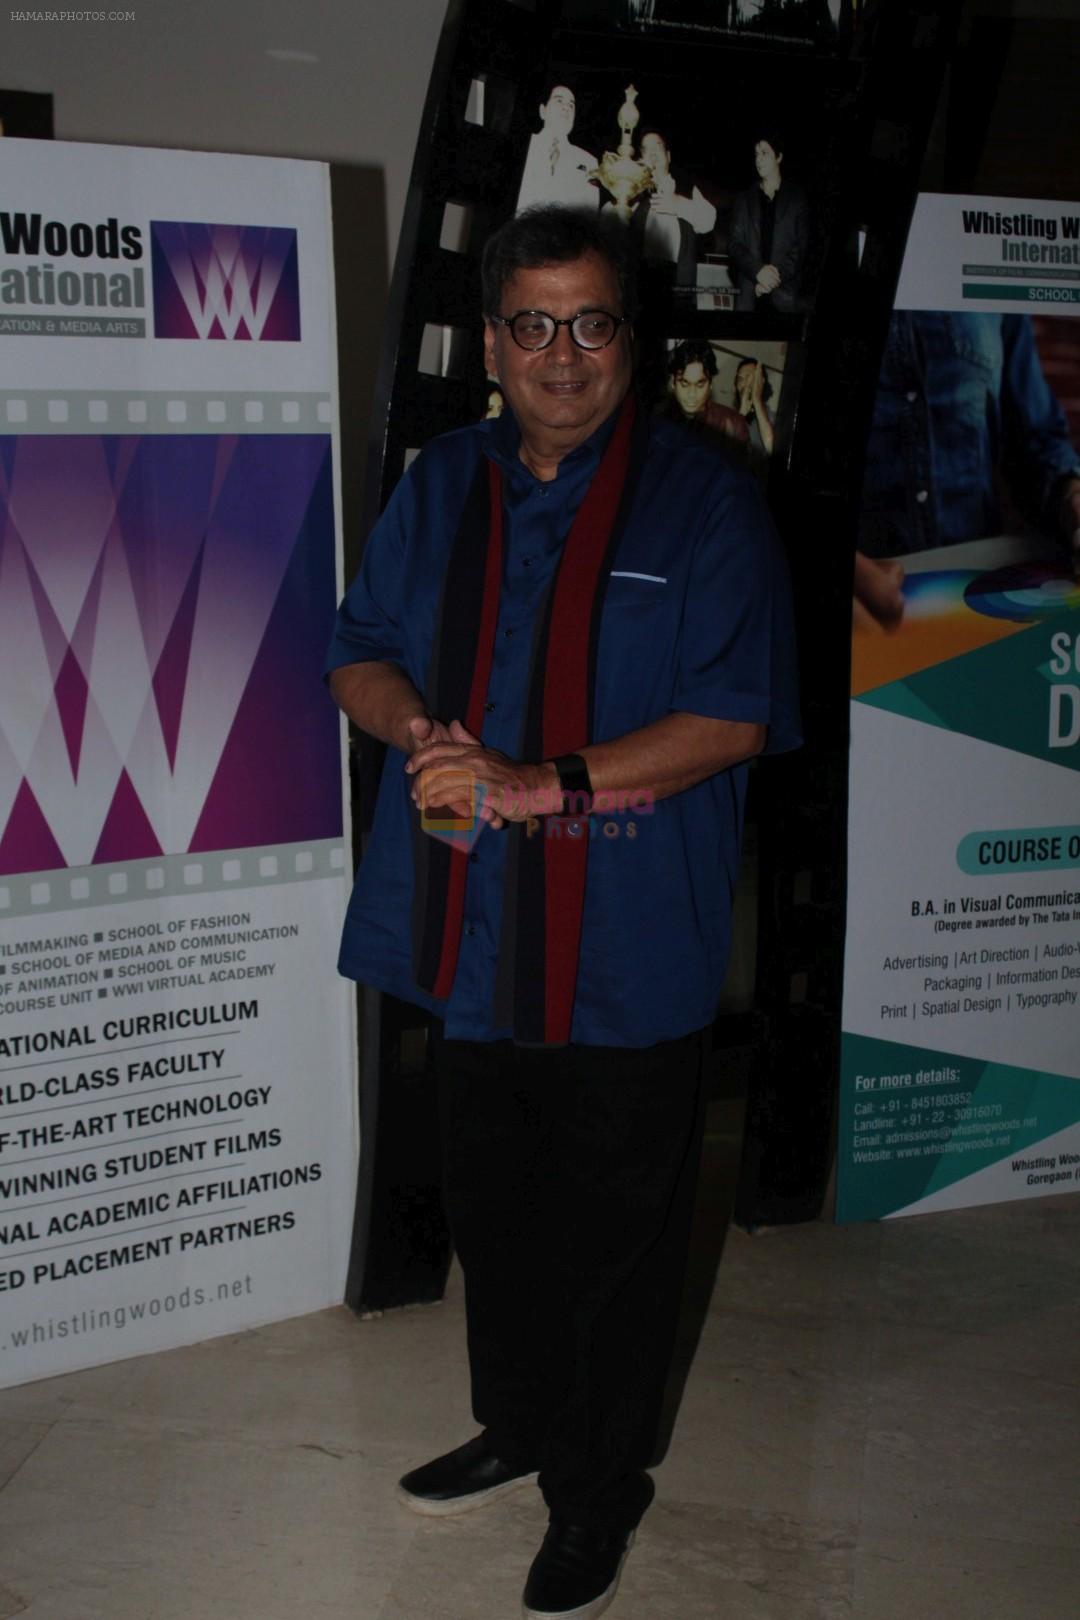 Subhash Ghai at Whistling Woods International Institute on 19th April 2017